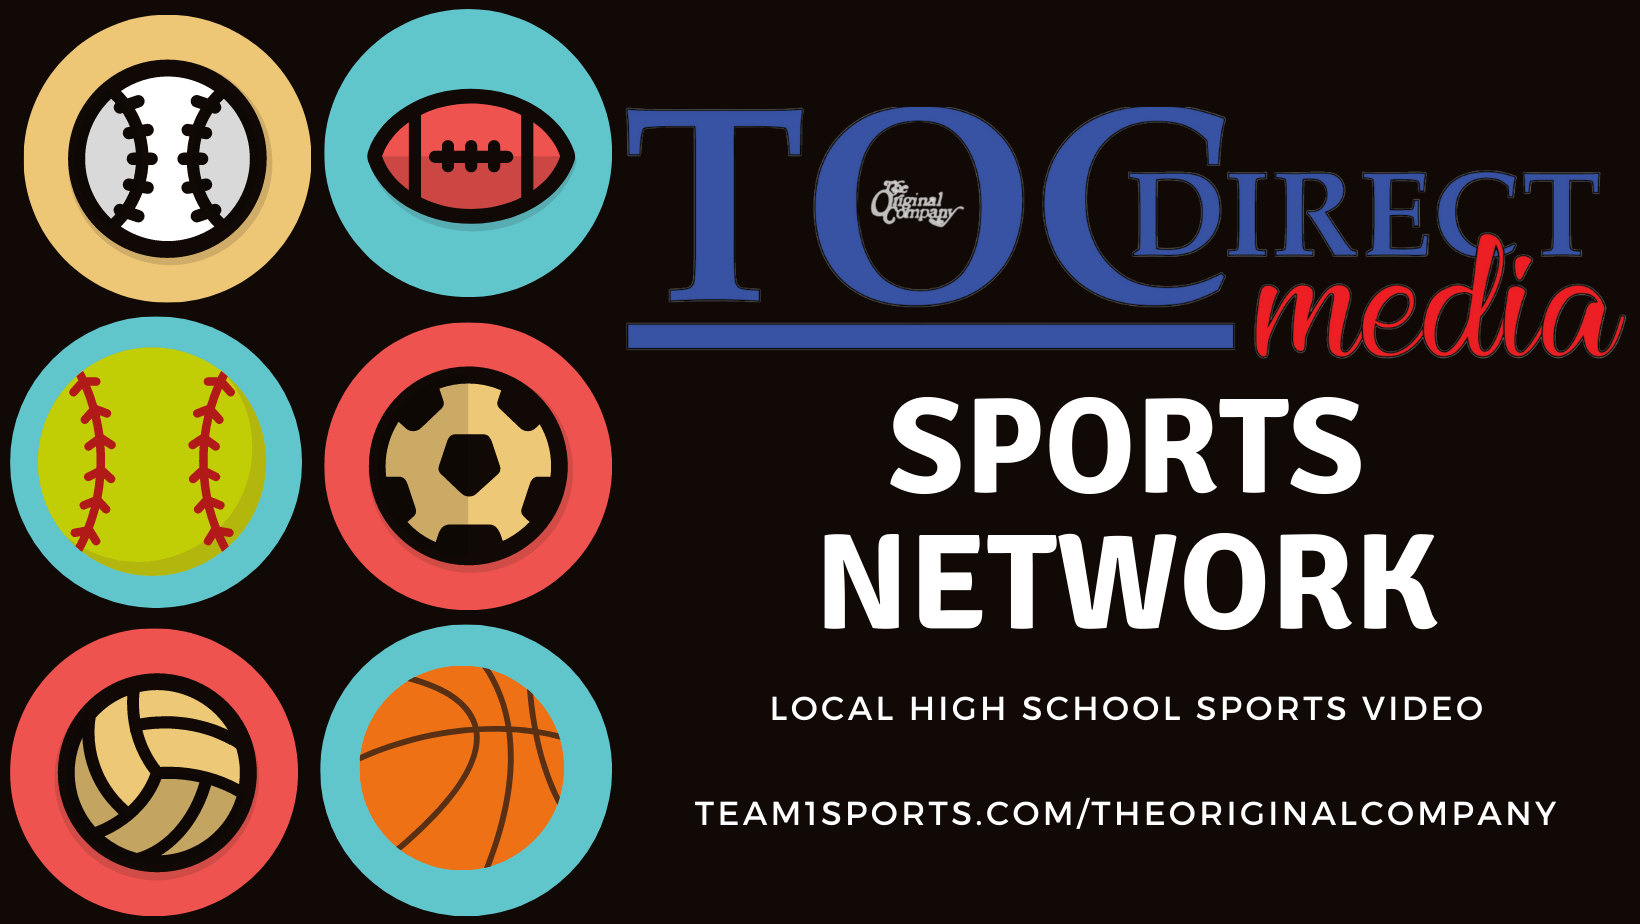 toc-direct-media-sports-network-png-32